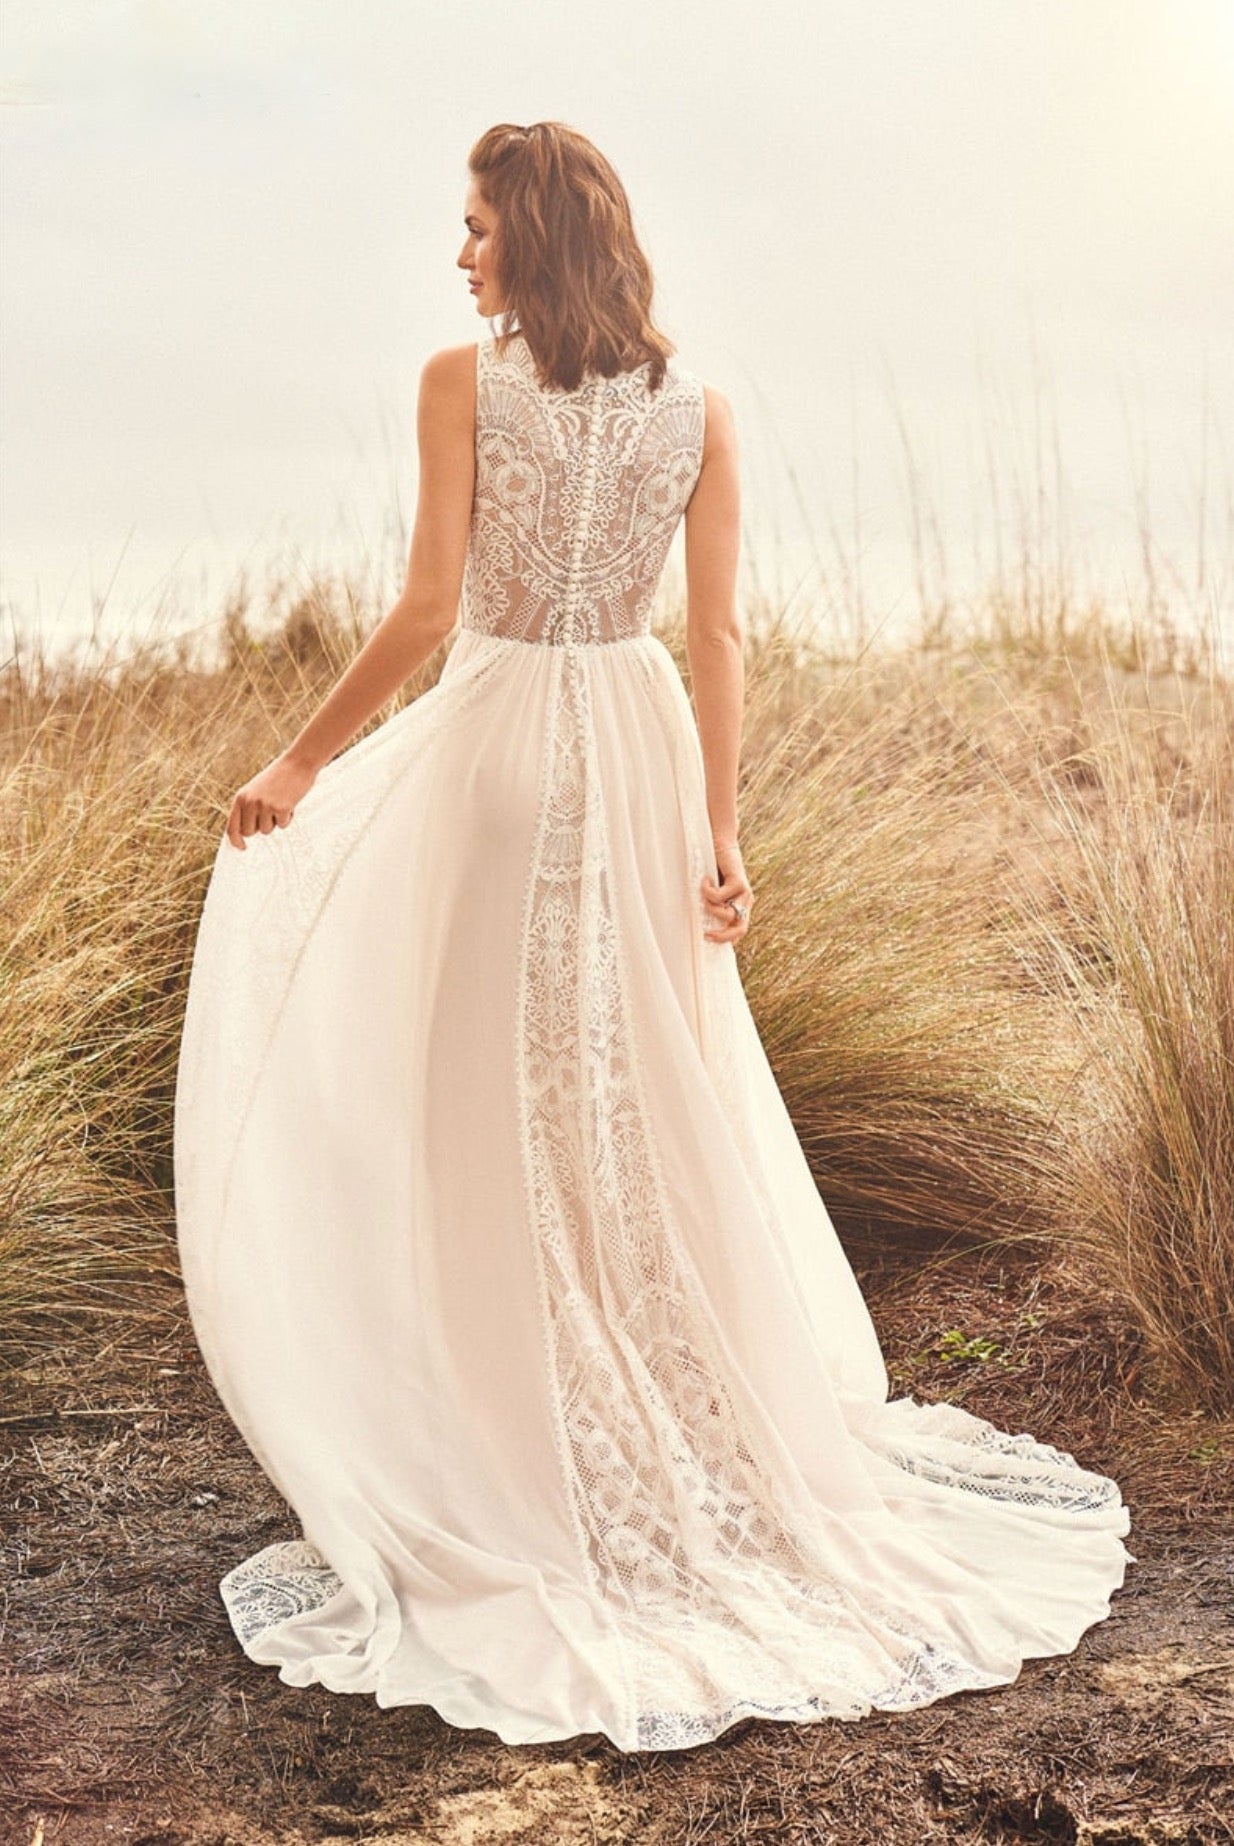 Boho Beach V Neck A Line Wedding Dress With White Lace Applique, Elegant  Tulle Fabric, Backless Design, And Sweep Train Plus Size Available CL2156  From Allloves, $112.83